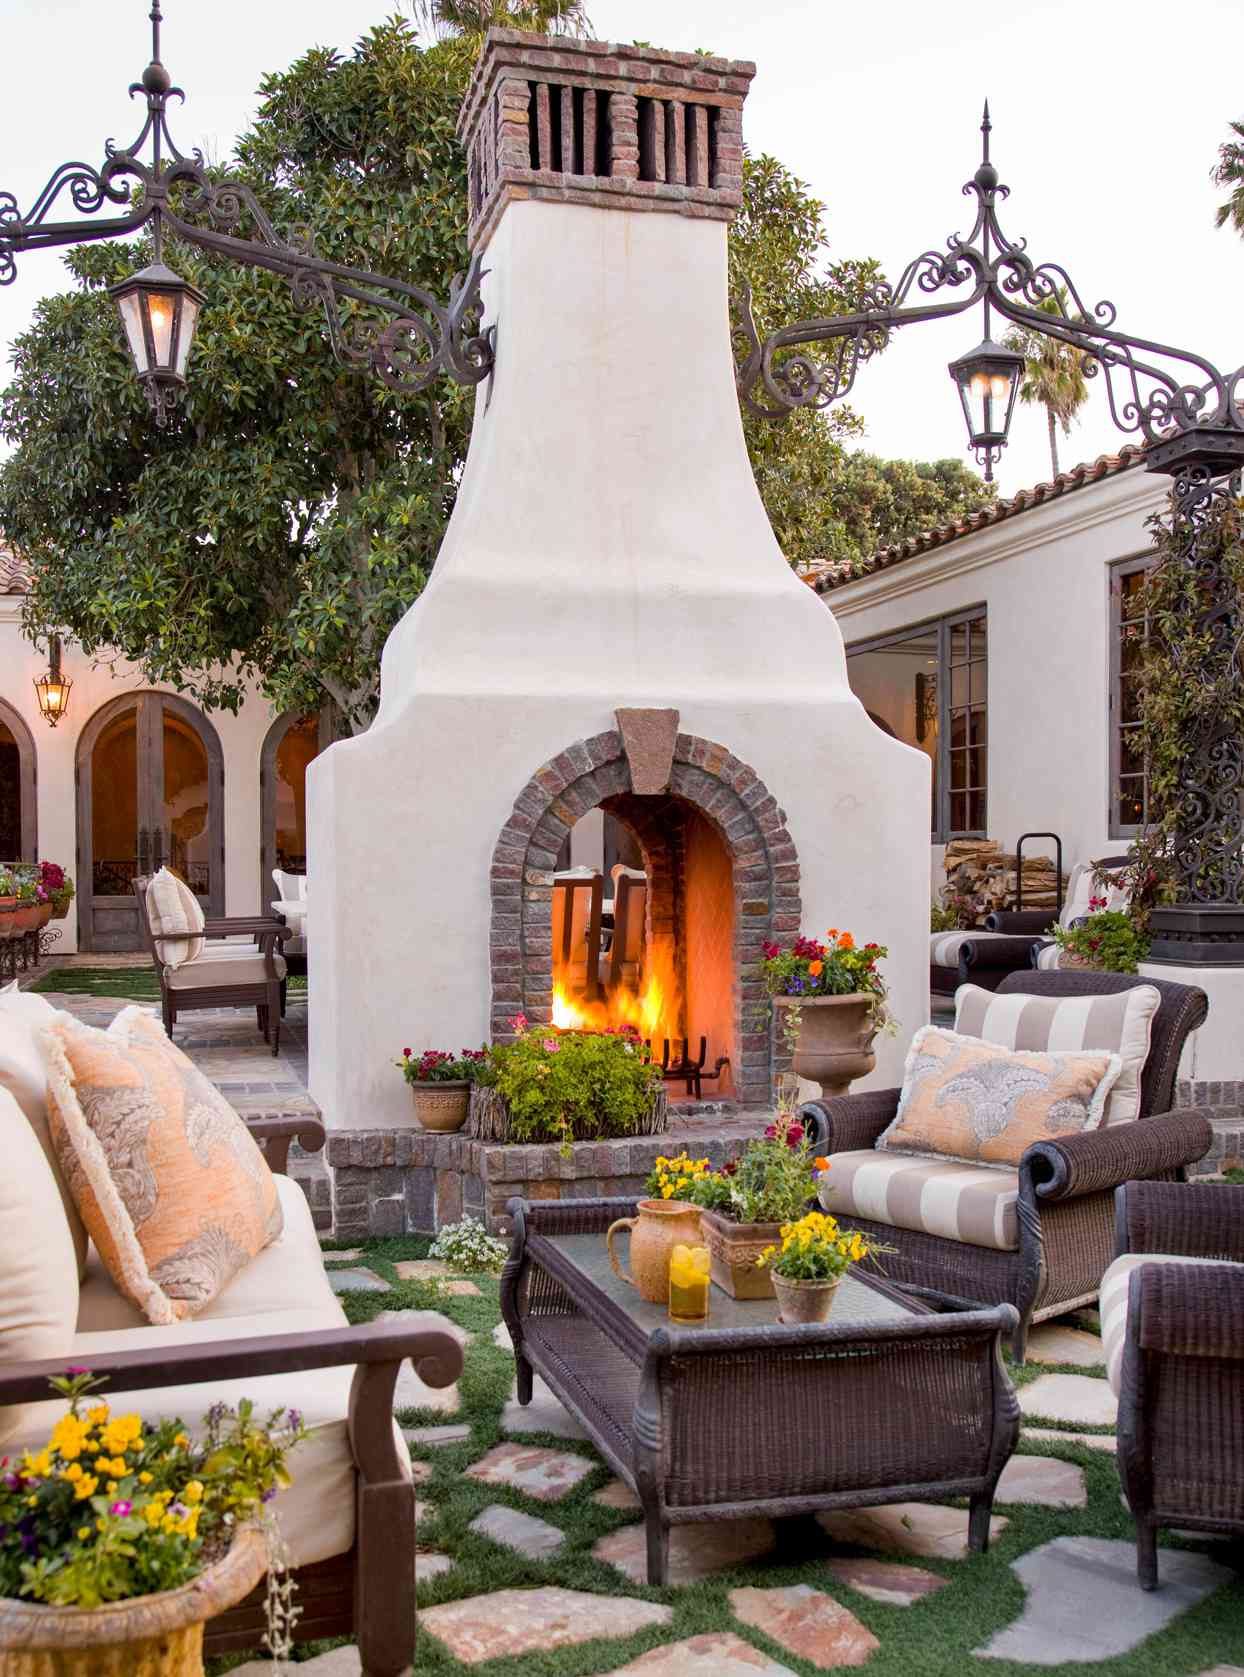 23 Cozy Outdoor Fireplace Ideas For The Most Inviting Backyard Better Homes Gardens